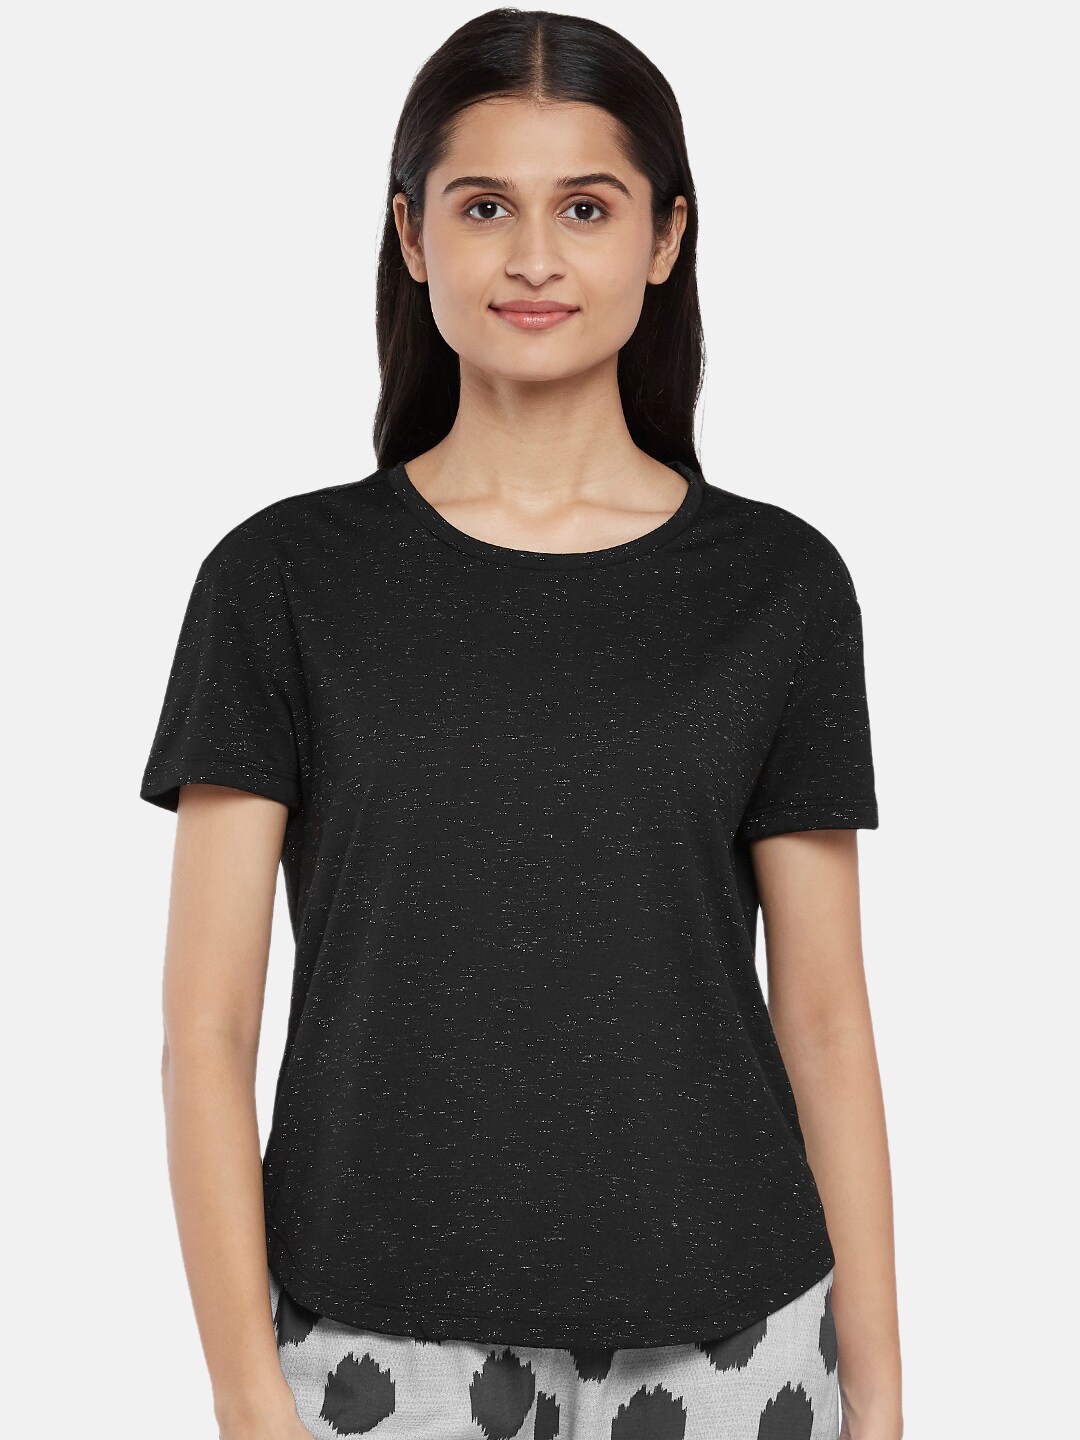 Dreamz by Pantaloons Black Solid Lounge tshirt Price in India